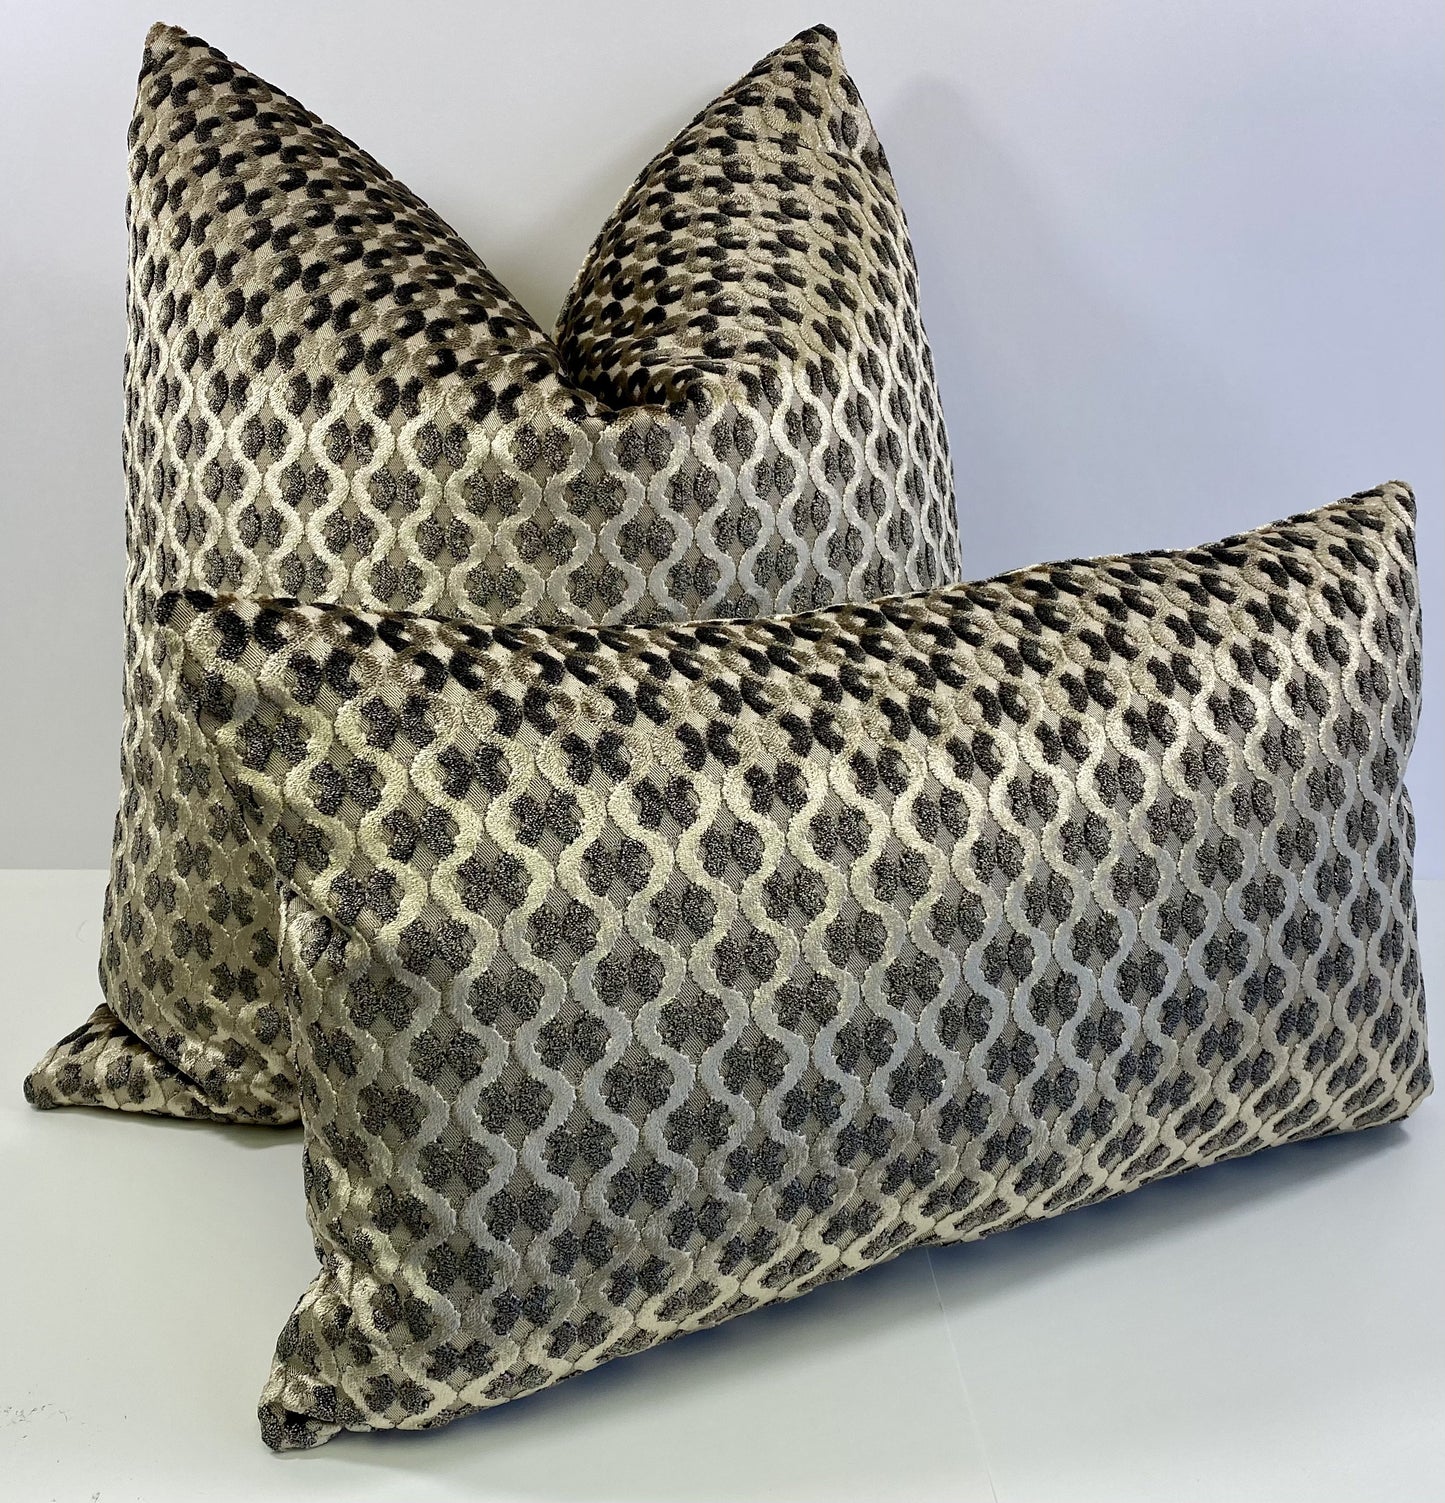 Luxury Lumbar Pillow - 24" x 14" - 5th Ave; Geometric waves in burnished gold and black on a burnished gold base